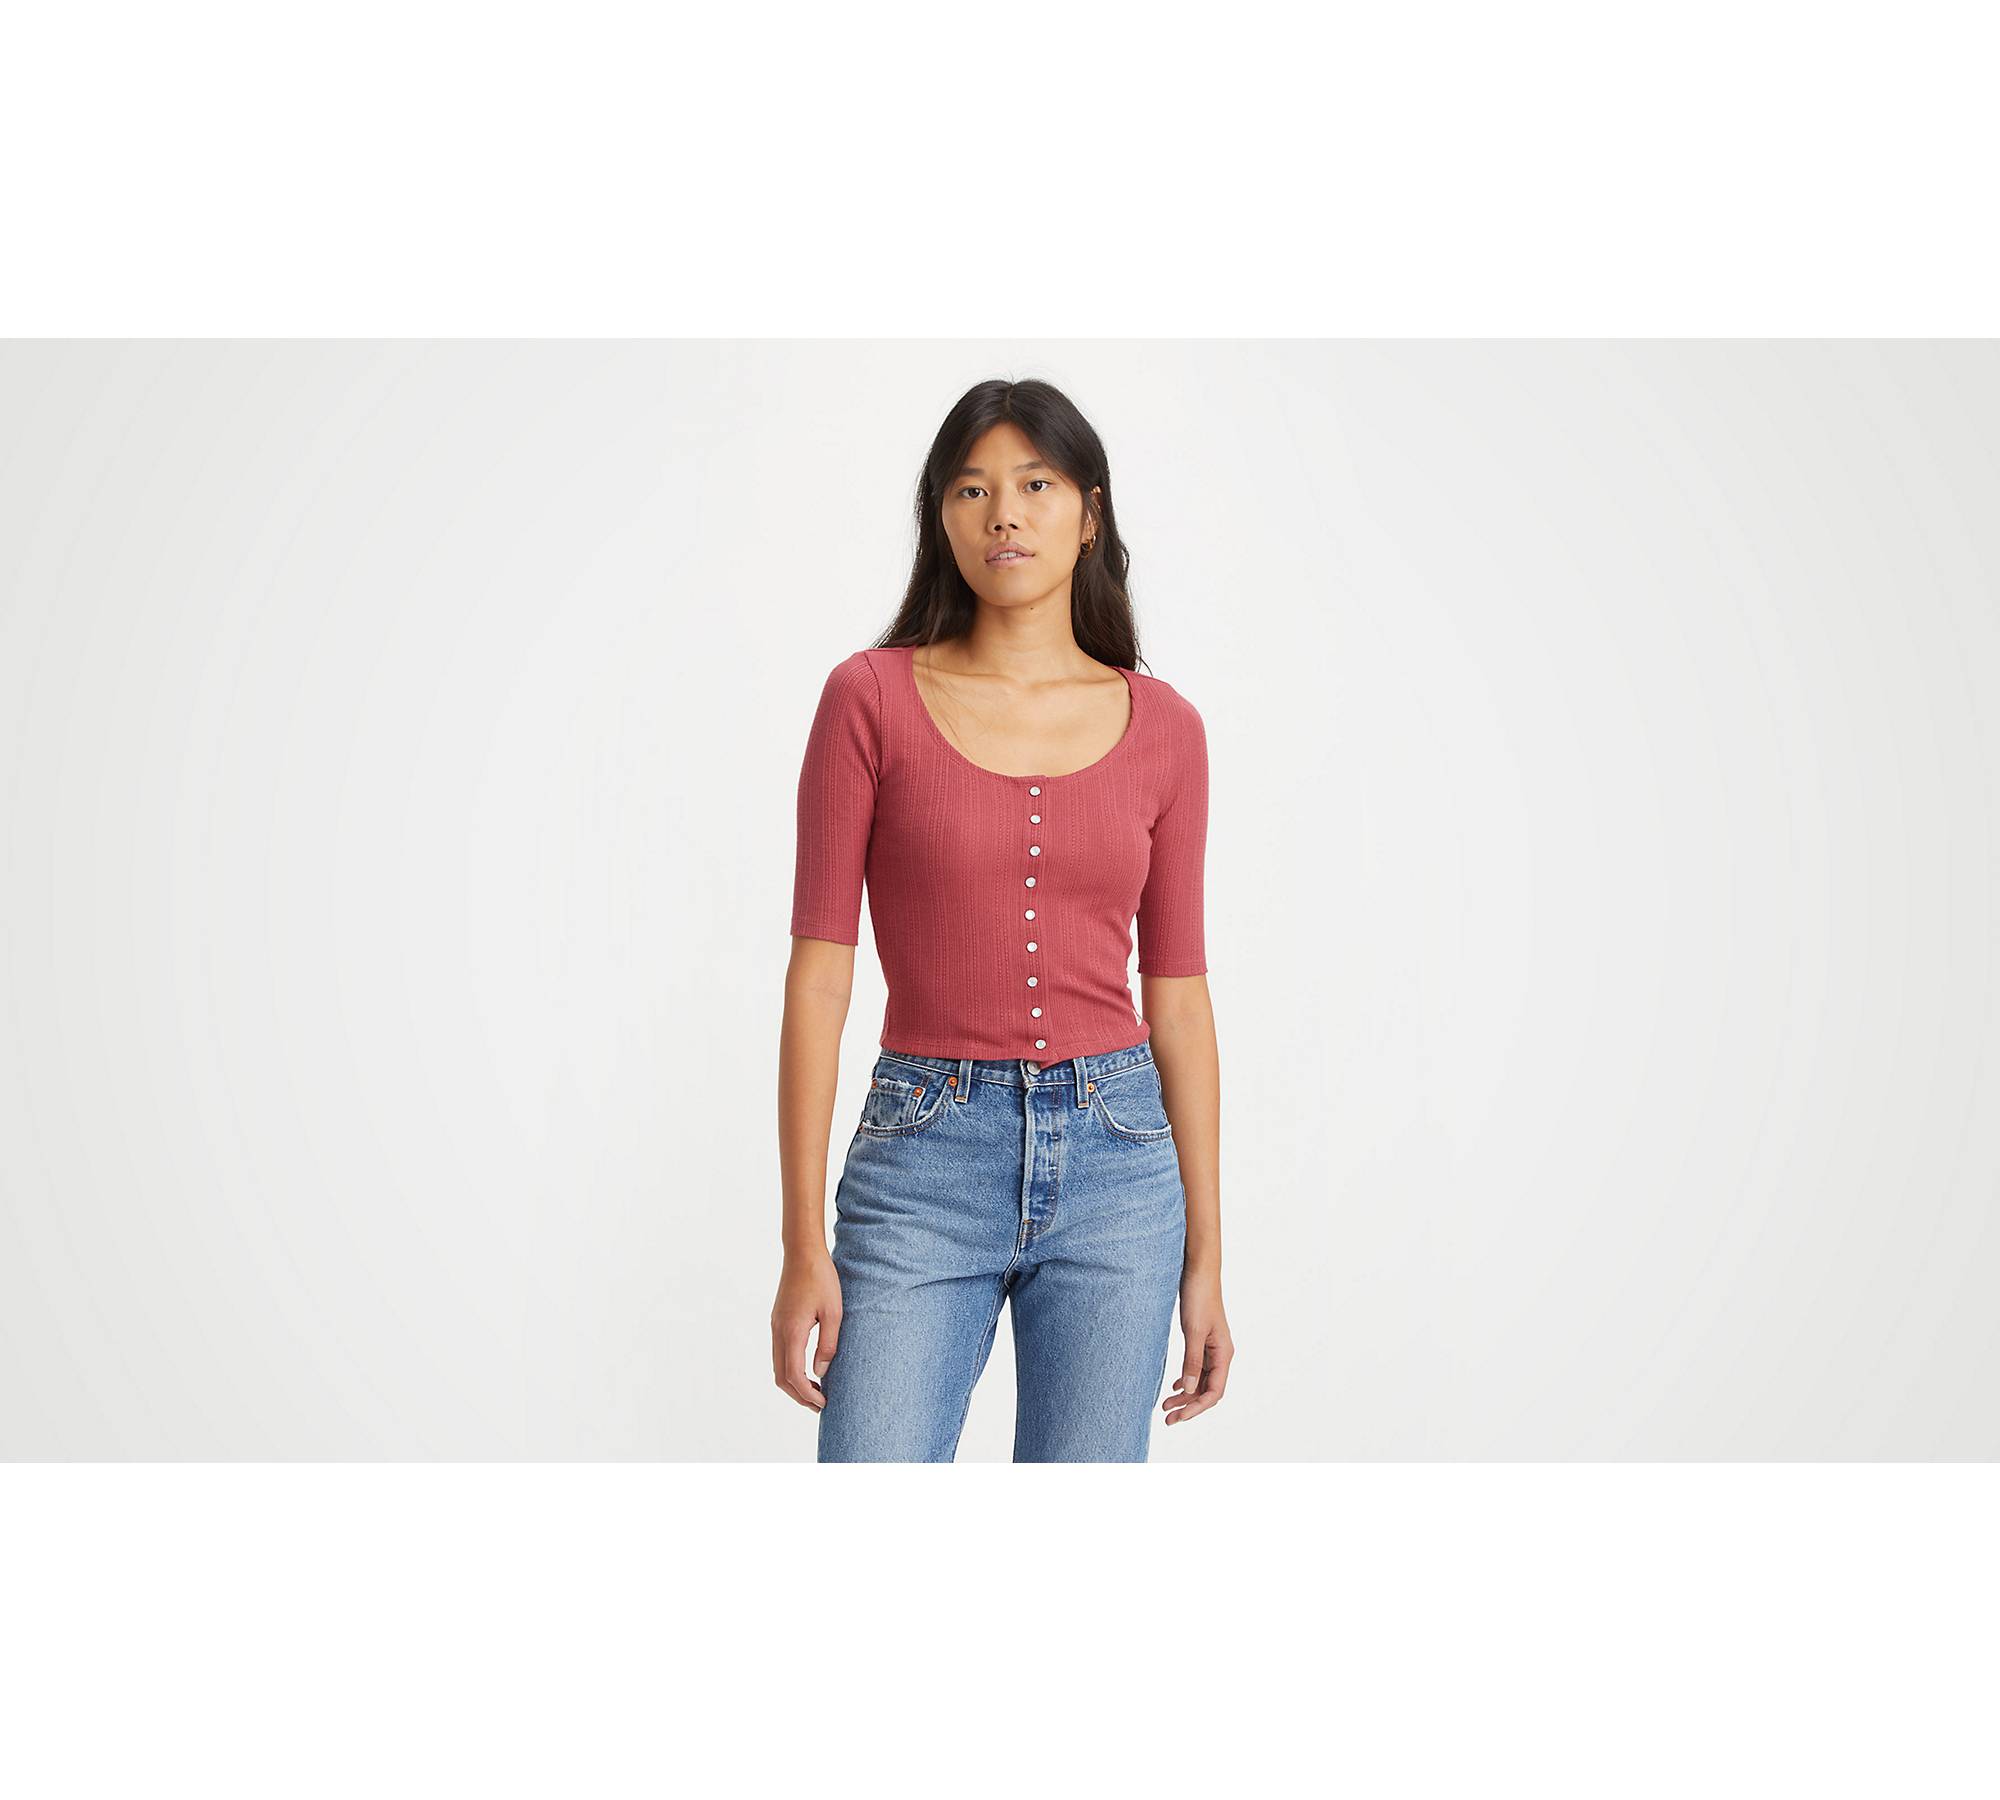 Dry Goods Pointelle Top - Red | Levi's® IT